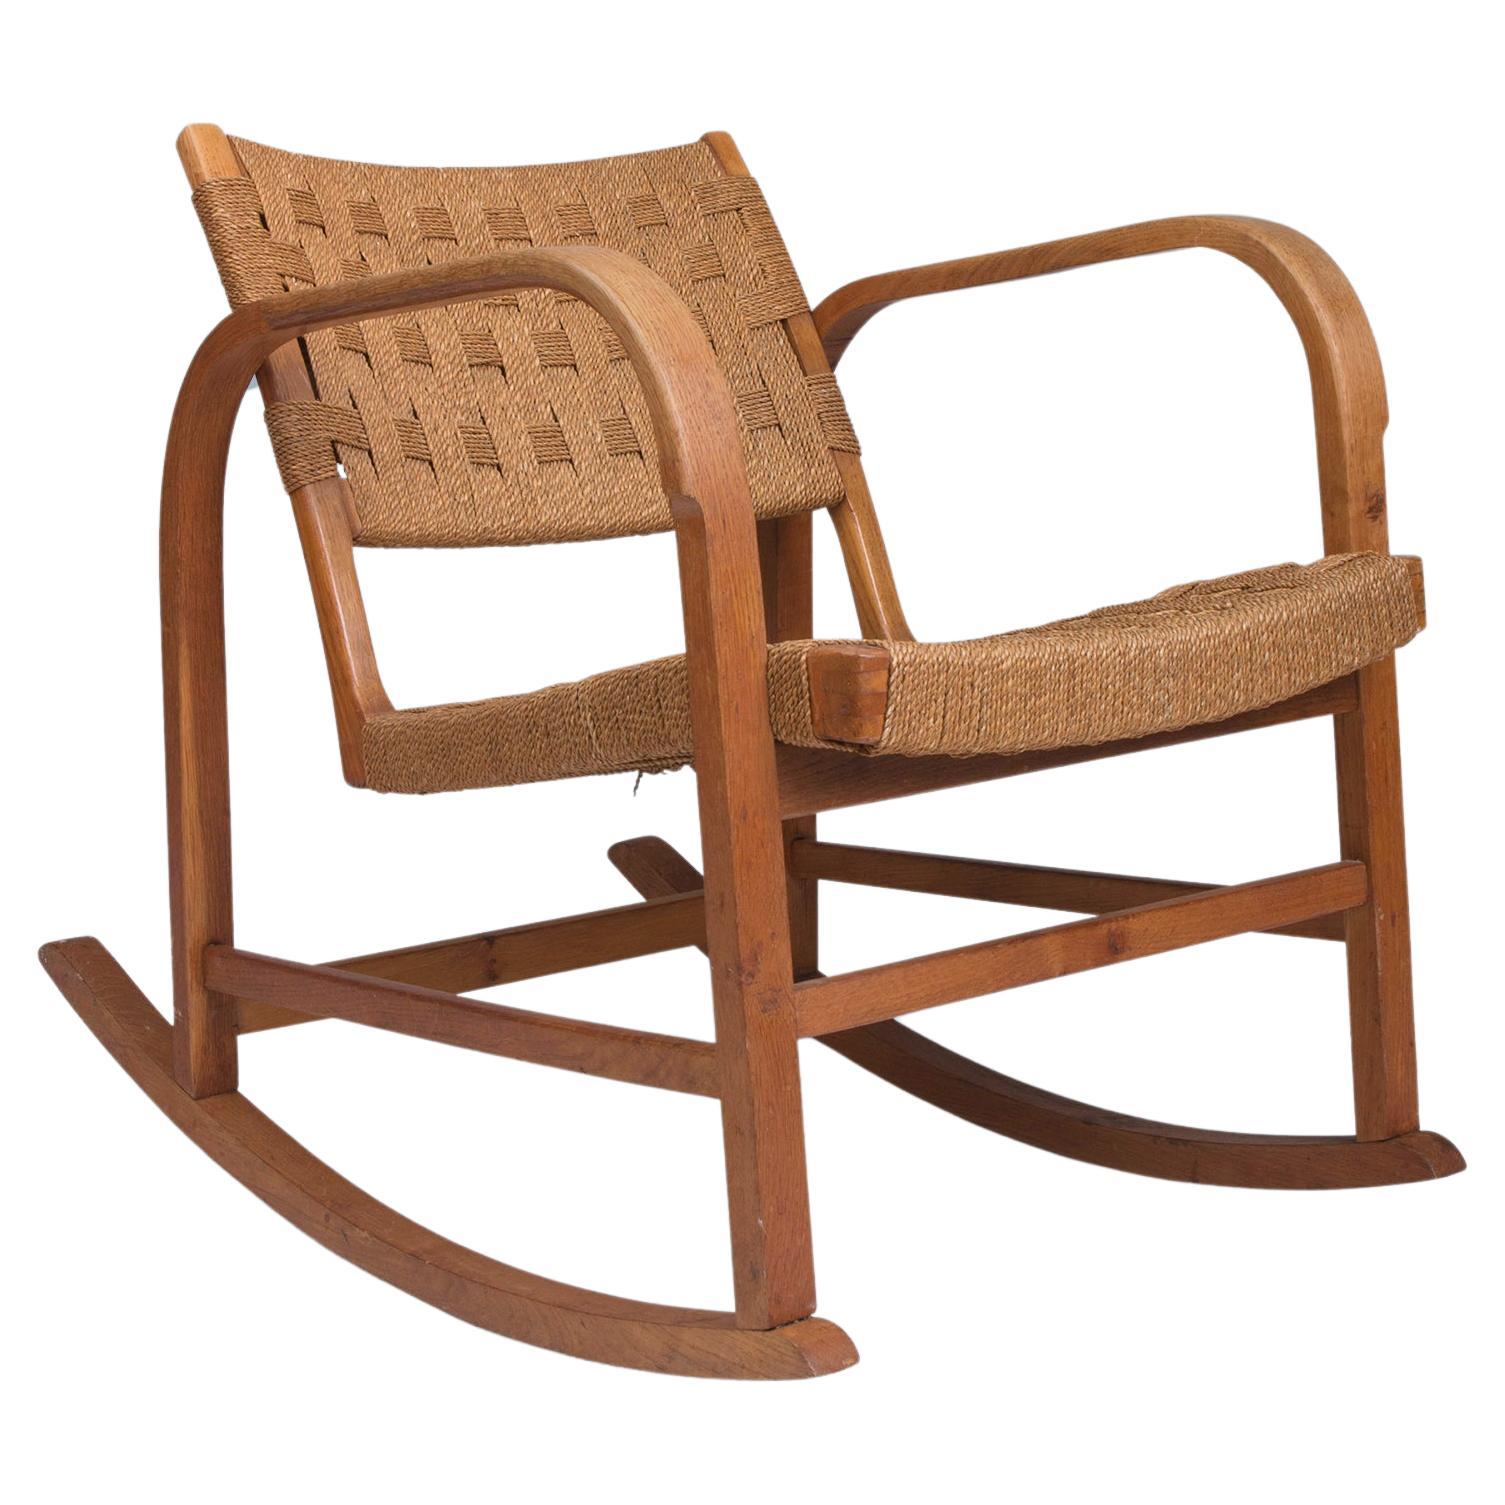 Danish modern oak rocking chair with curves and seagrass seat  For Sale